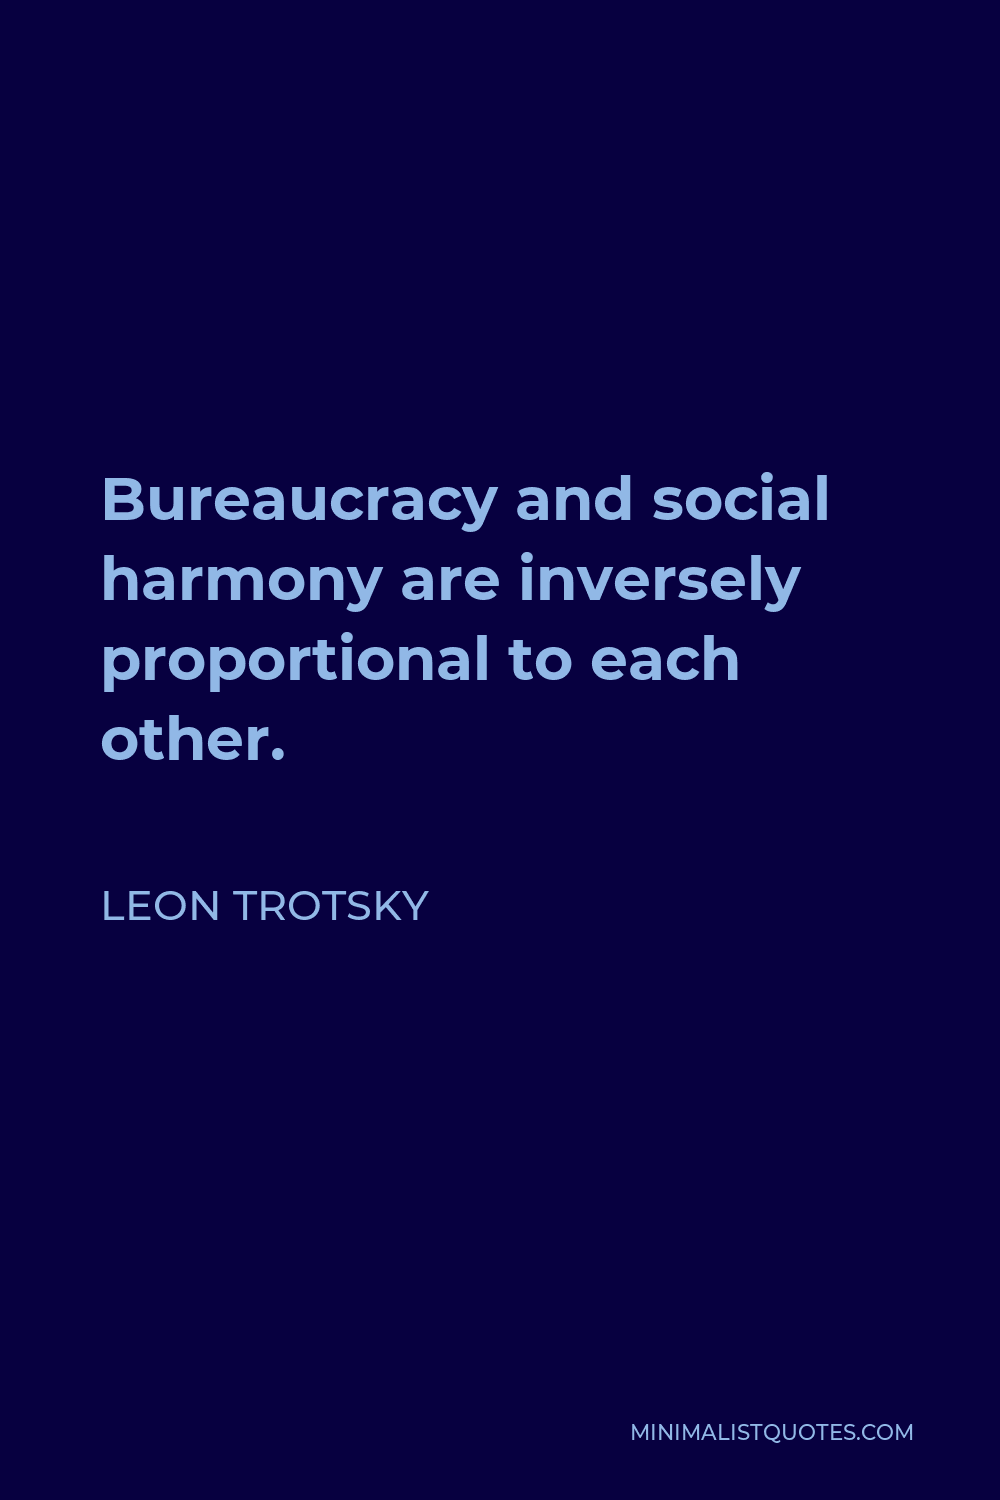 Leon Trotsky Quote - Bureaucracy and social harmony are inversely proportional to each other.